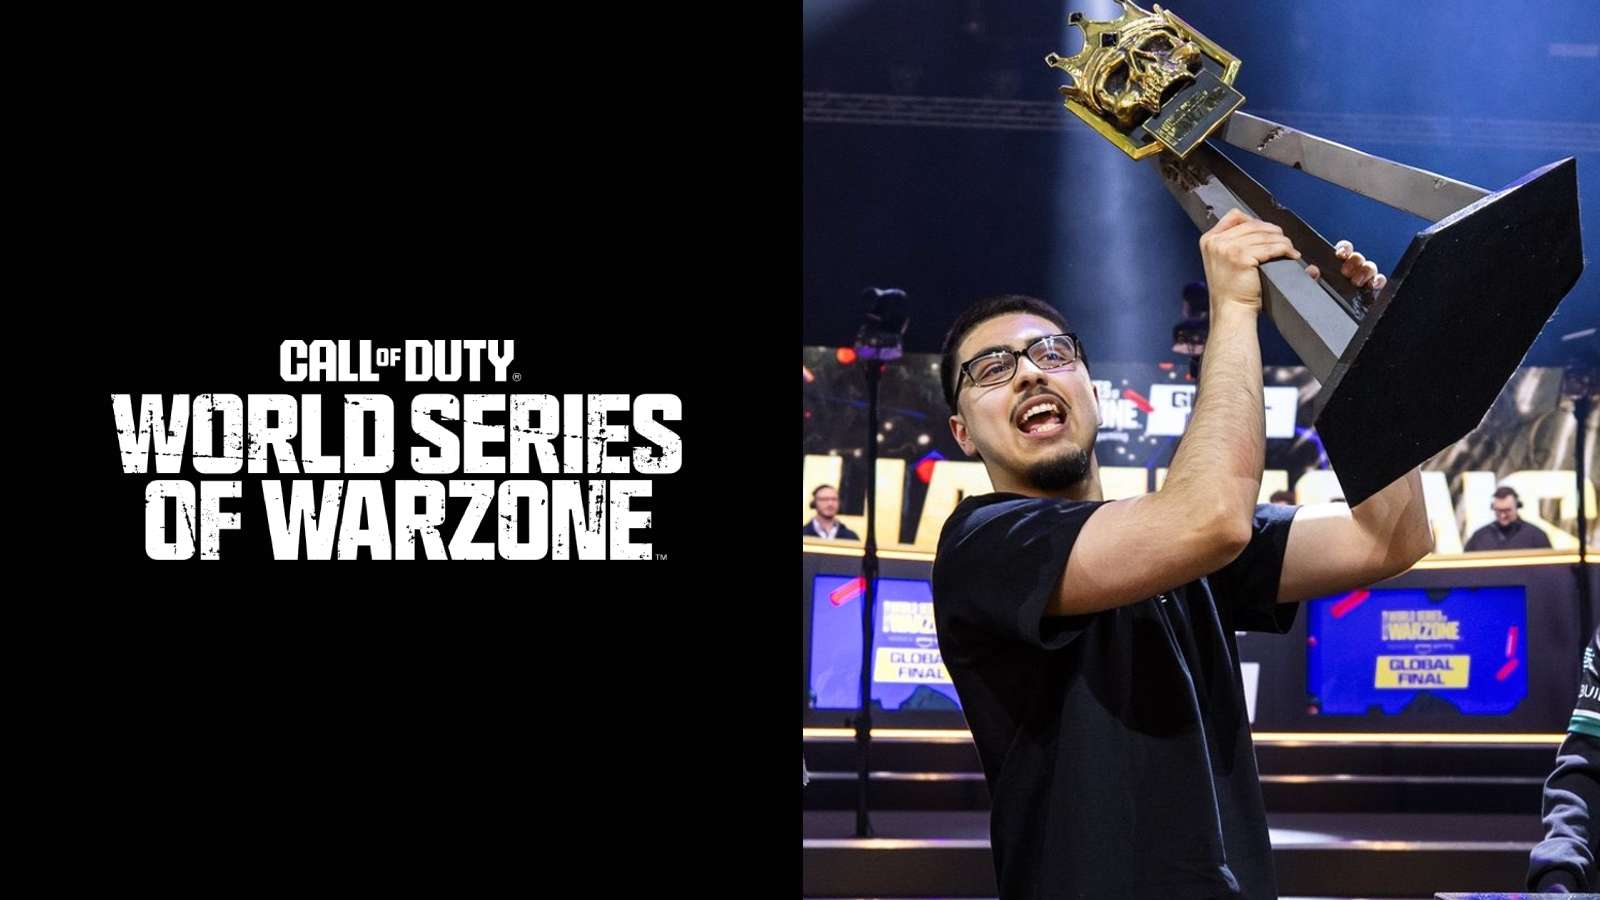 Shifty holding up World Series of Warzone trophy next to WSOW logo